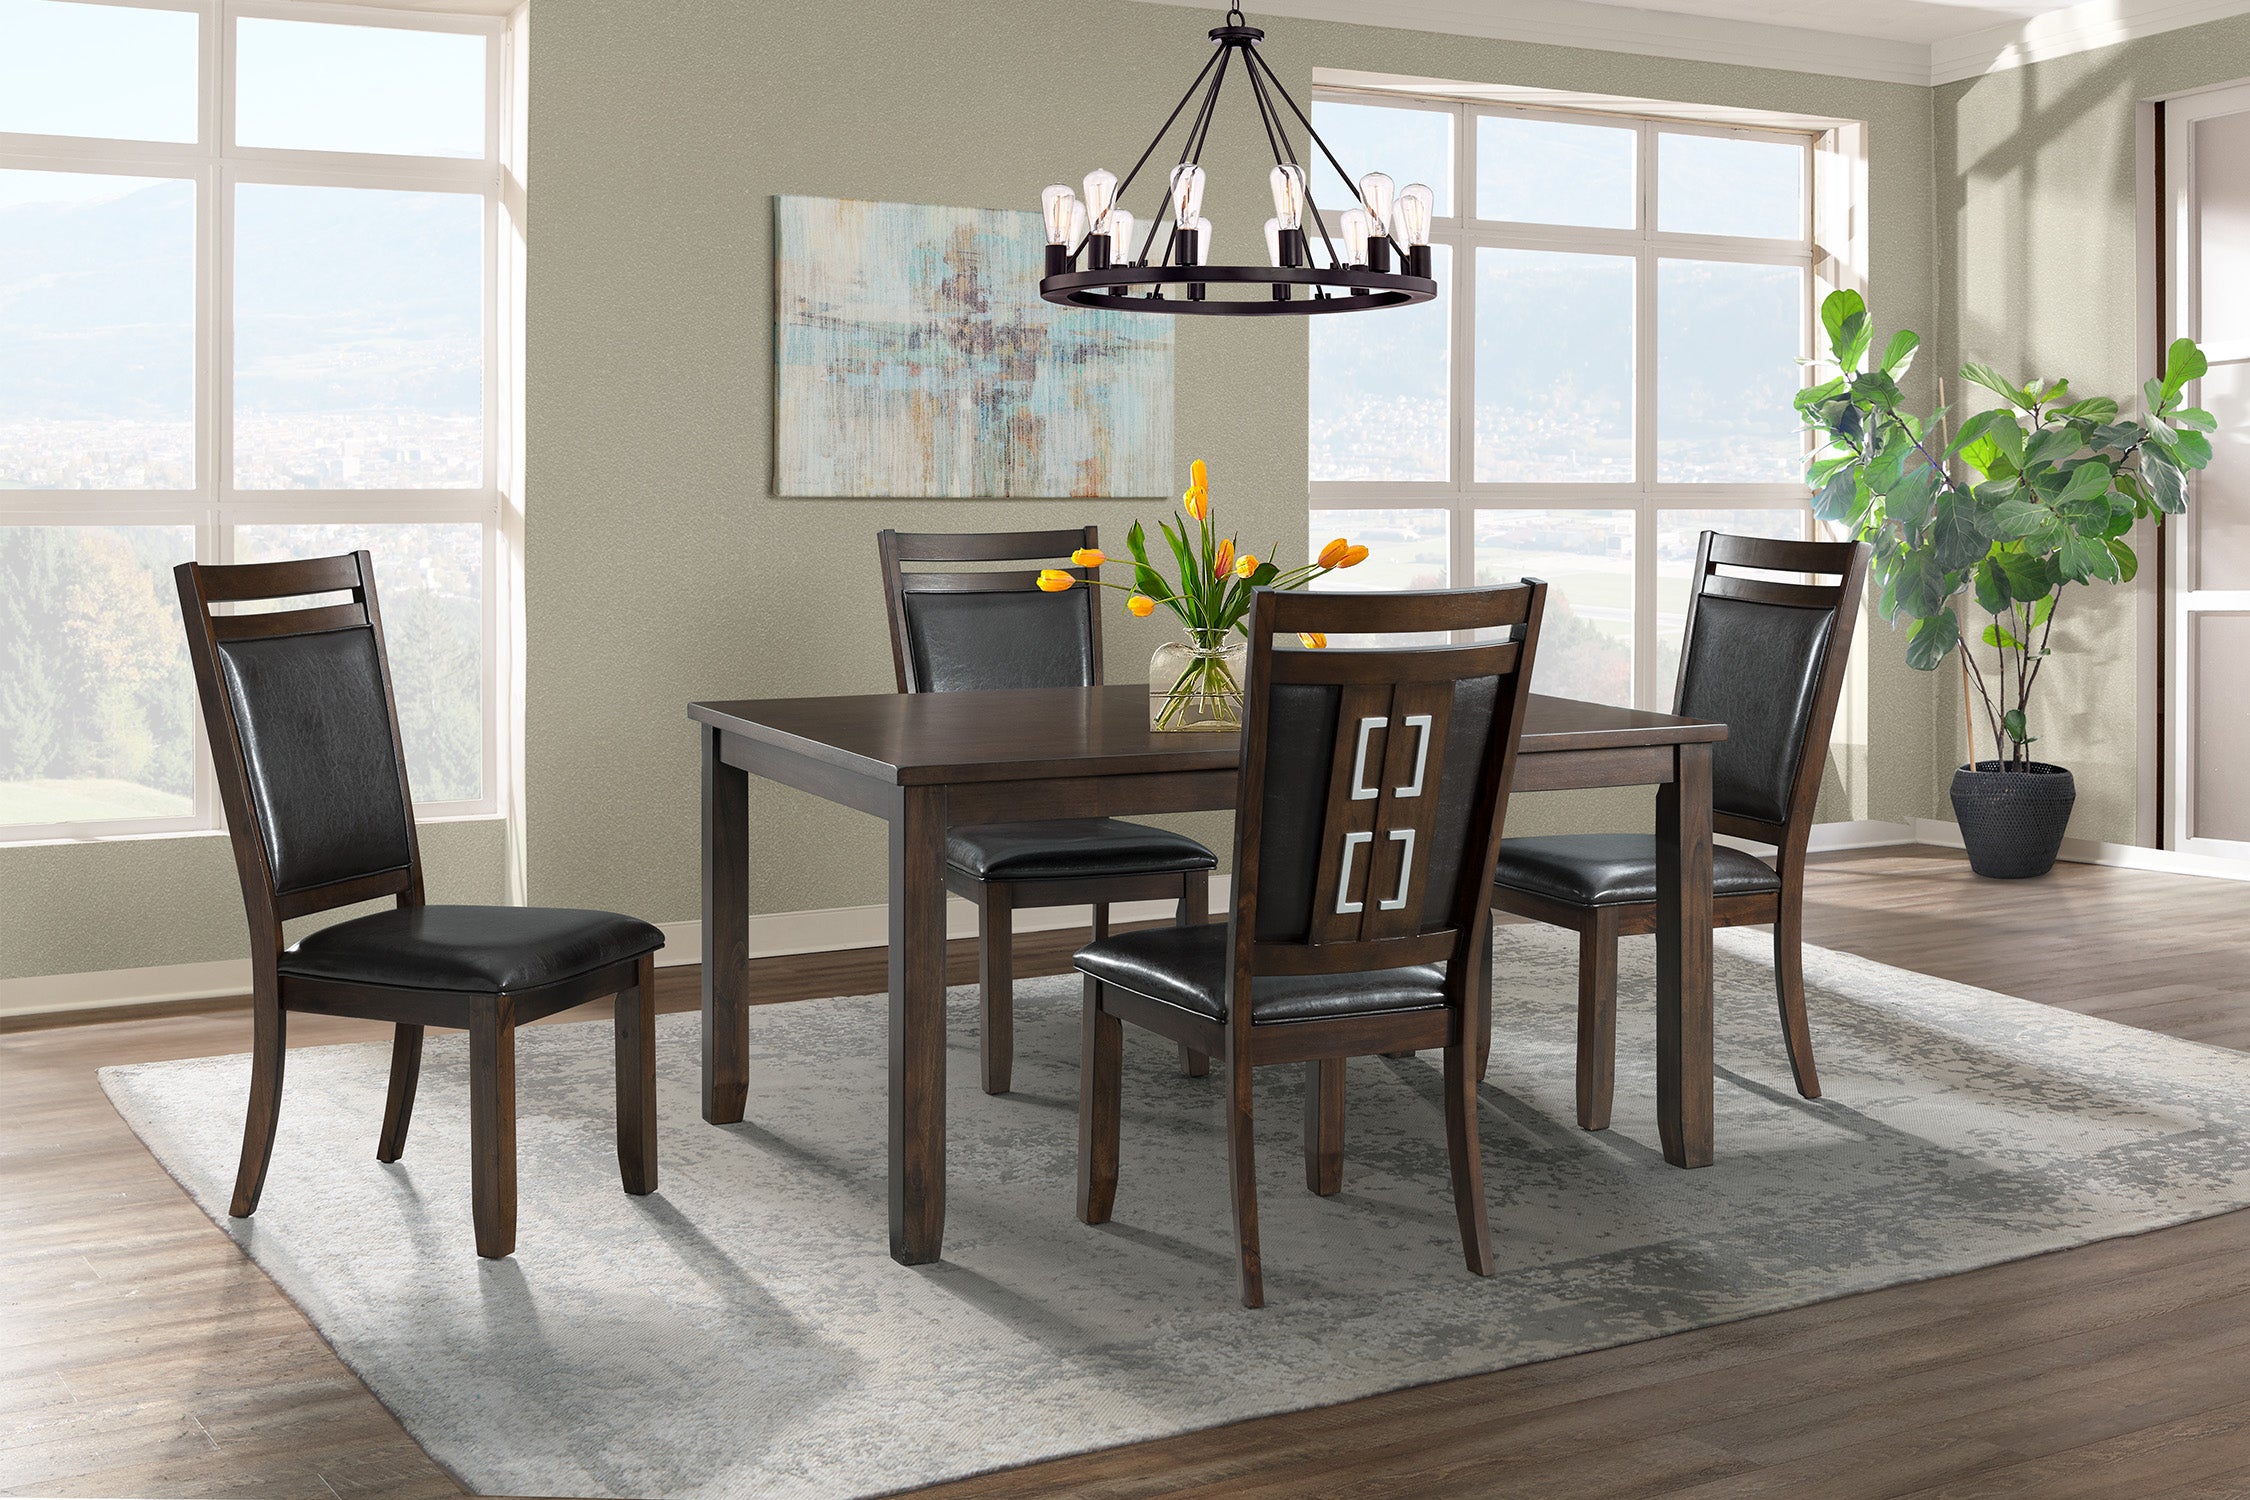 Rolex Espresso 5 Piece Dining Set With Upholstered Chair Kanes Furniture